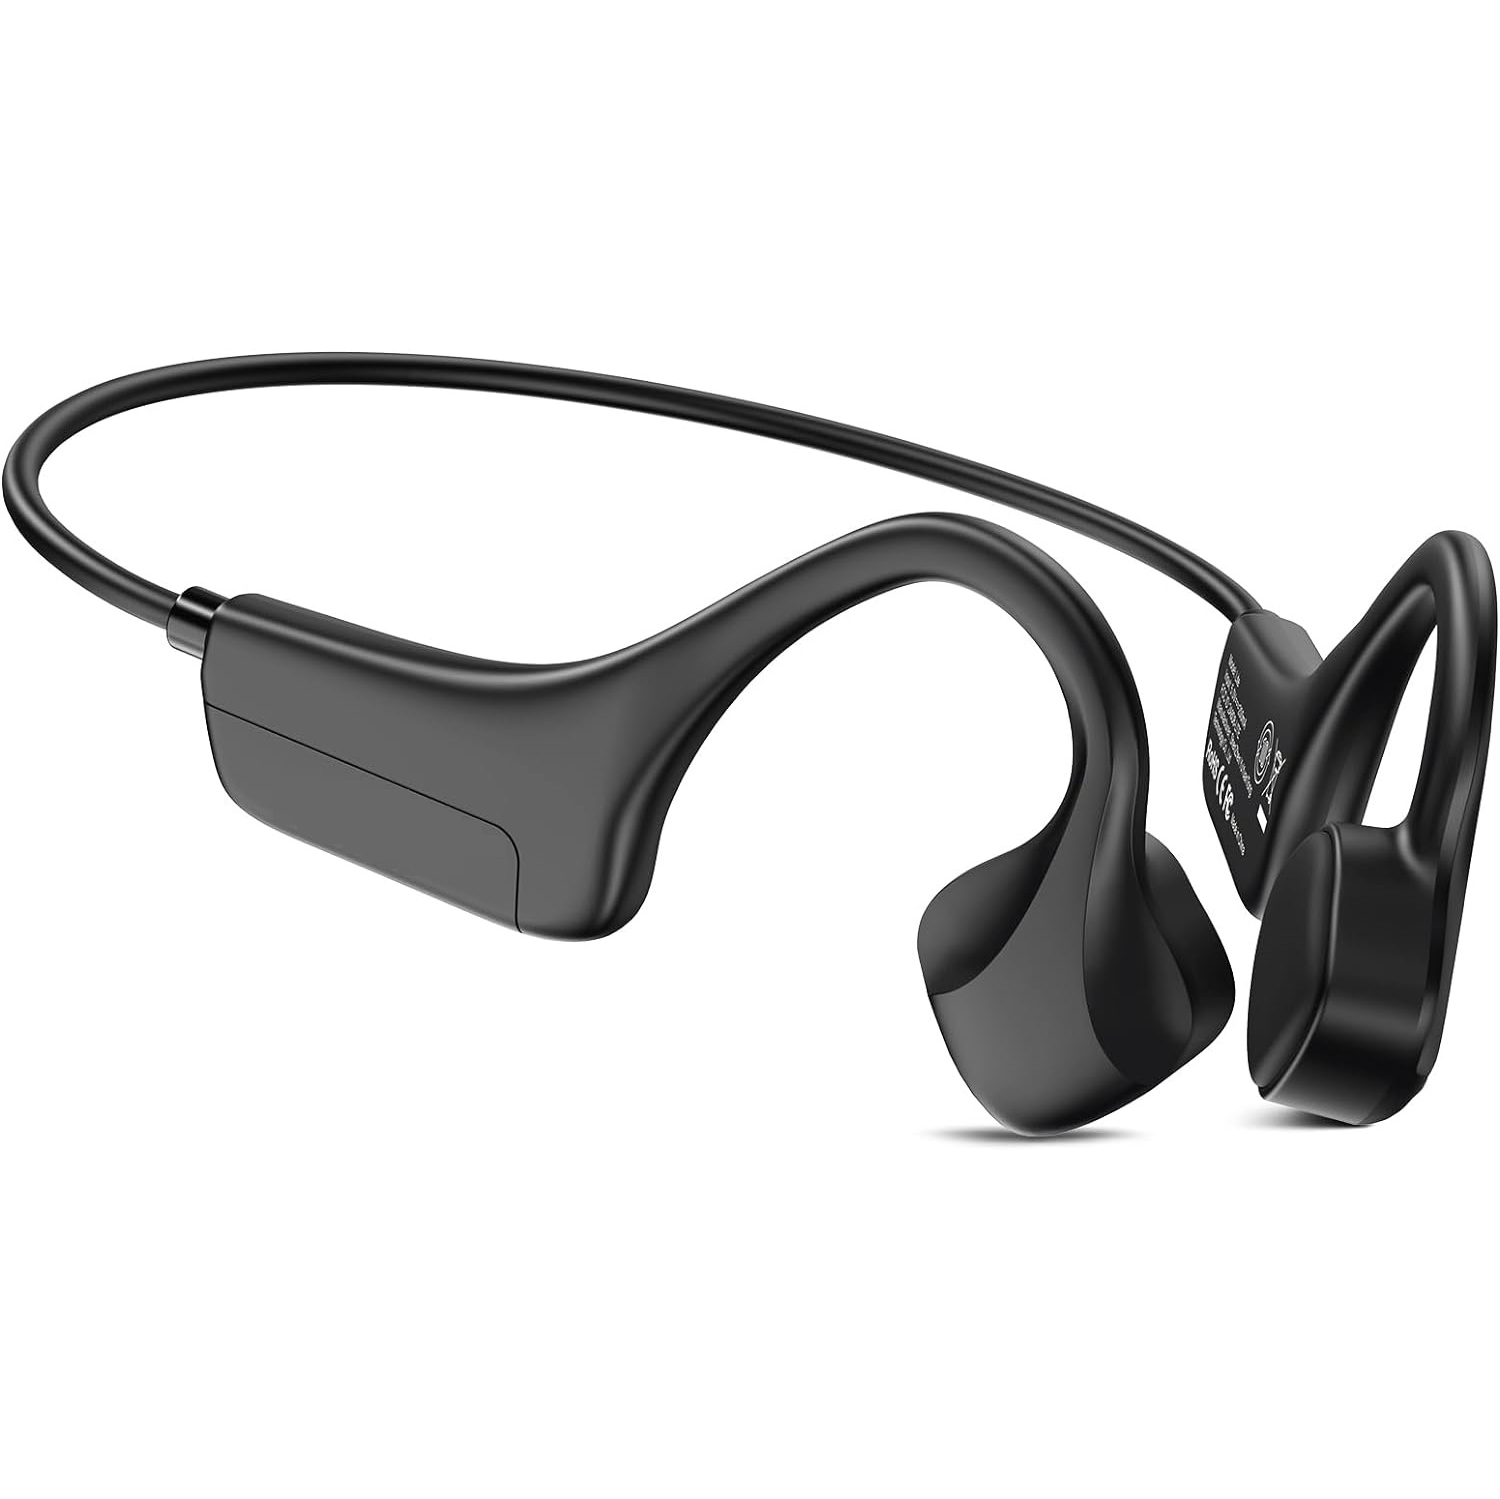 Bone Conduction Headphones Bluetooth Wireless, Open Ear Headphones with Built-in Mic,Sweat Resistant Sports Earphones for Running and Workouts